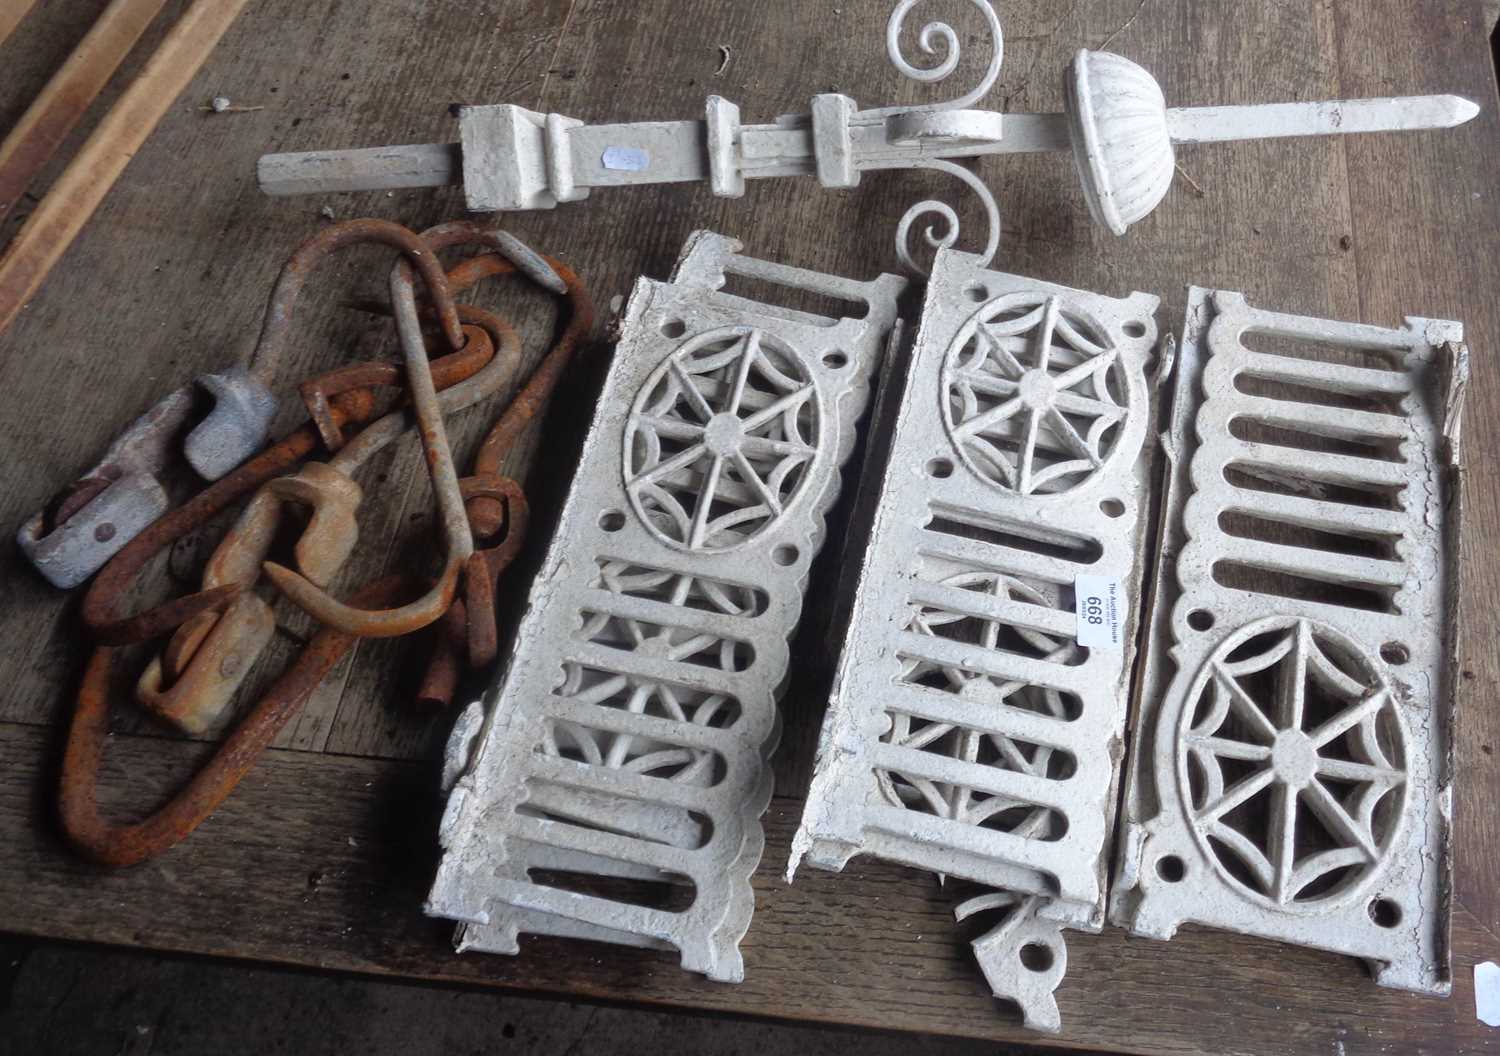 Victorian cast iron sections of a frieze for a shop display window frontage (8) and a finial